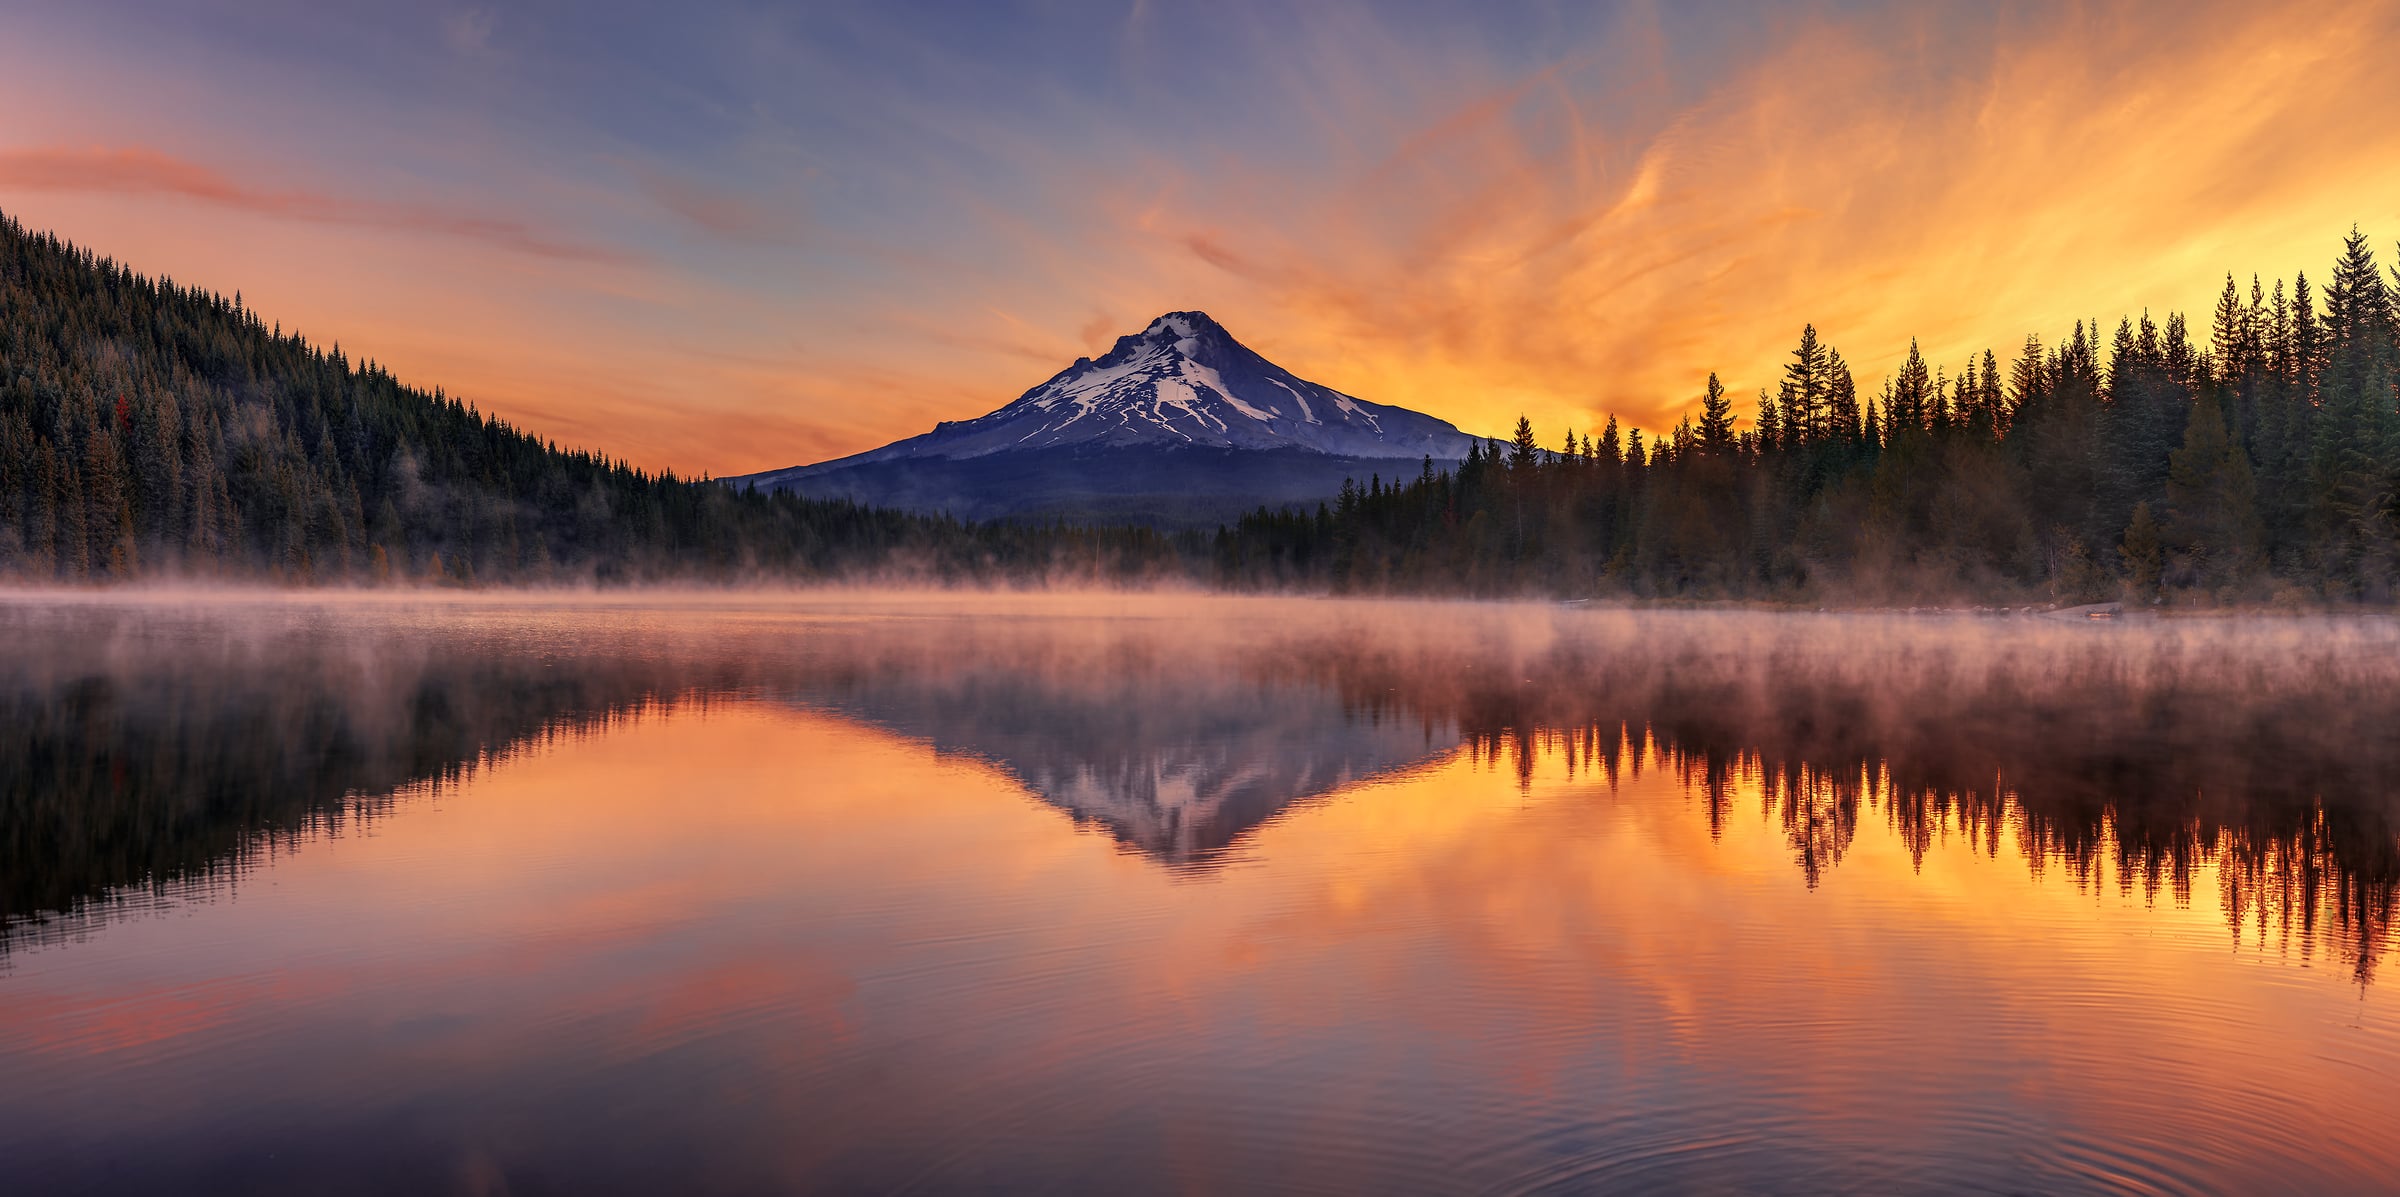 391 megapixels! A very high resolution, large-format VAST photo print of a beautiful landscape; photograph created by Chris Collacott in Trillium Lake, Oregon